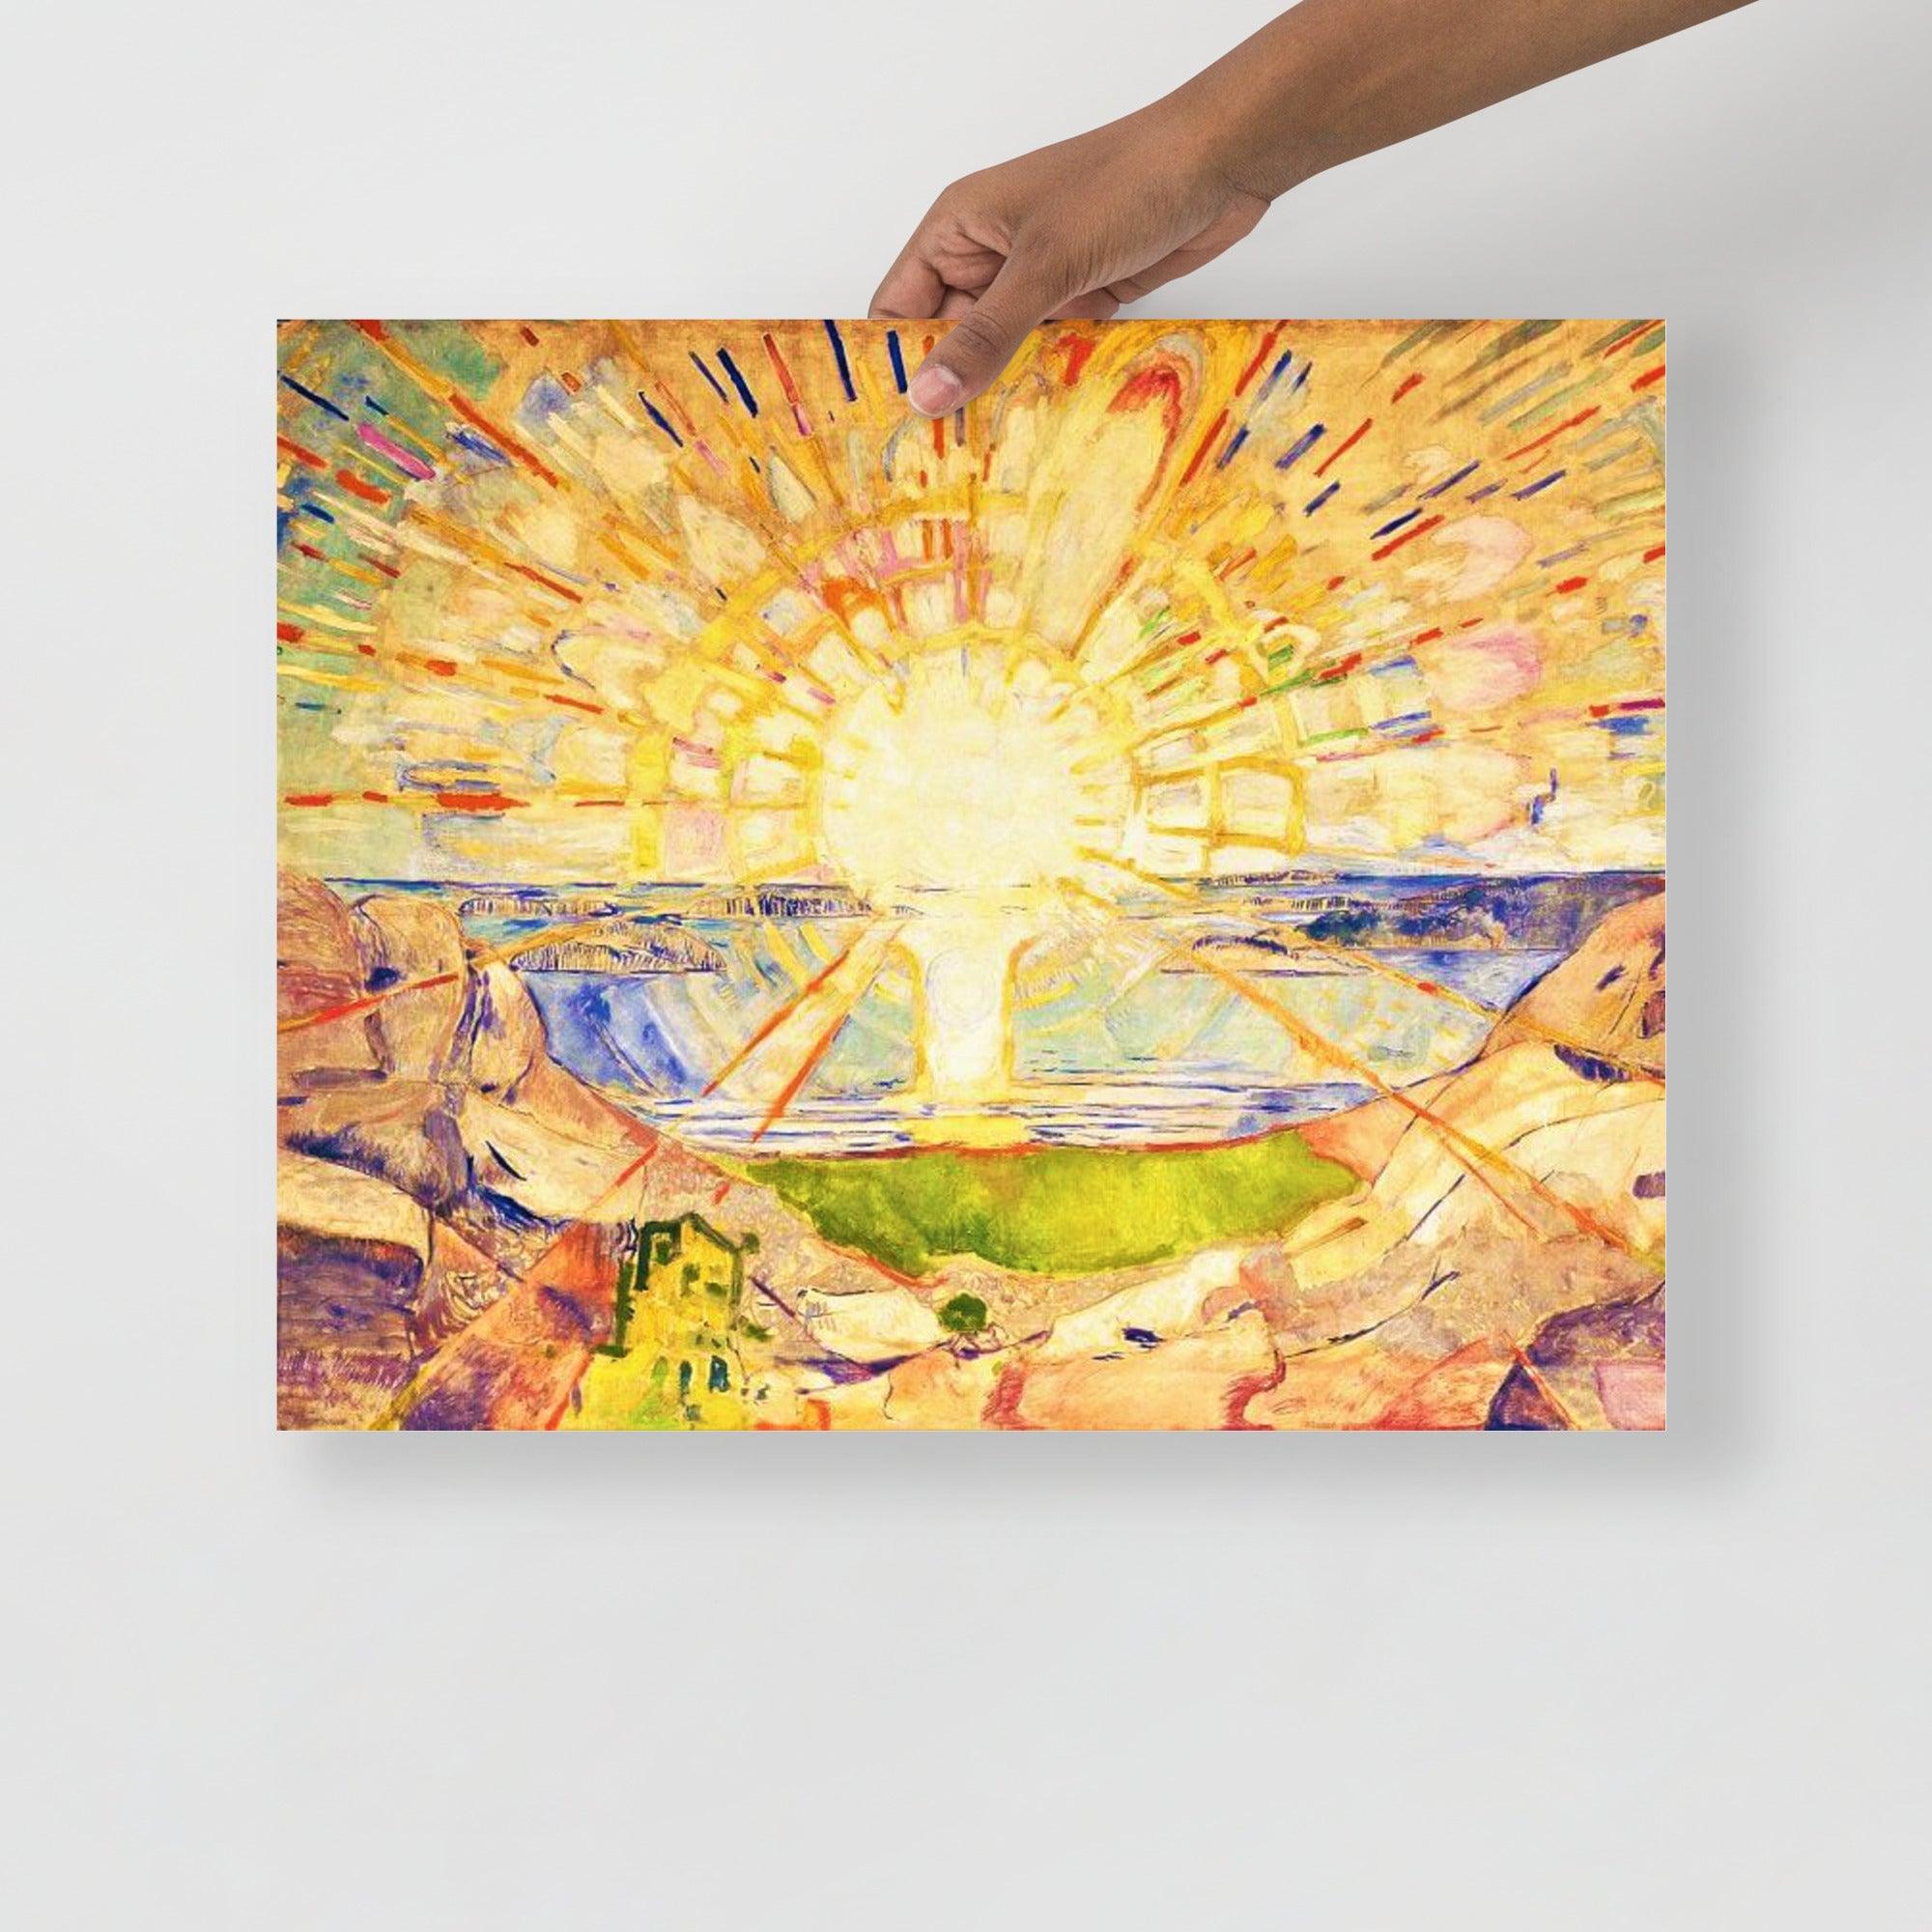 The Sun By Edvard Munch poster on a plain backdrop in size 16x20”.